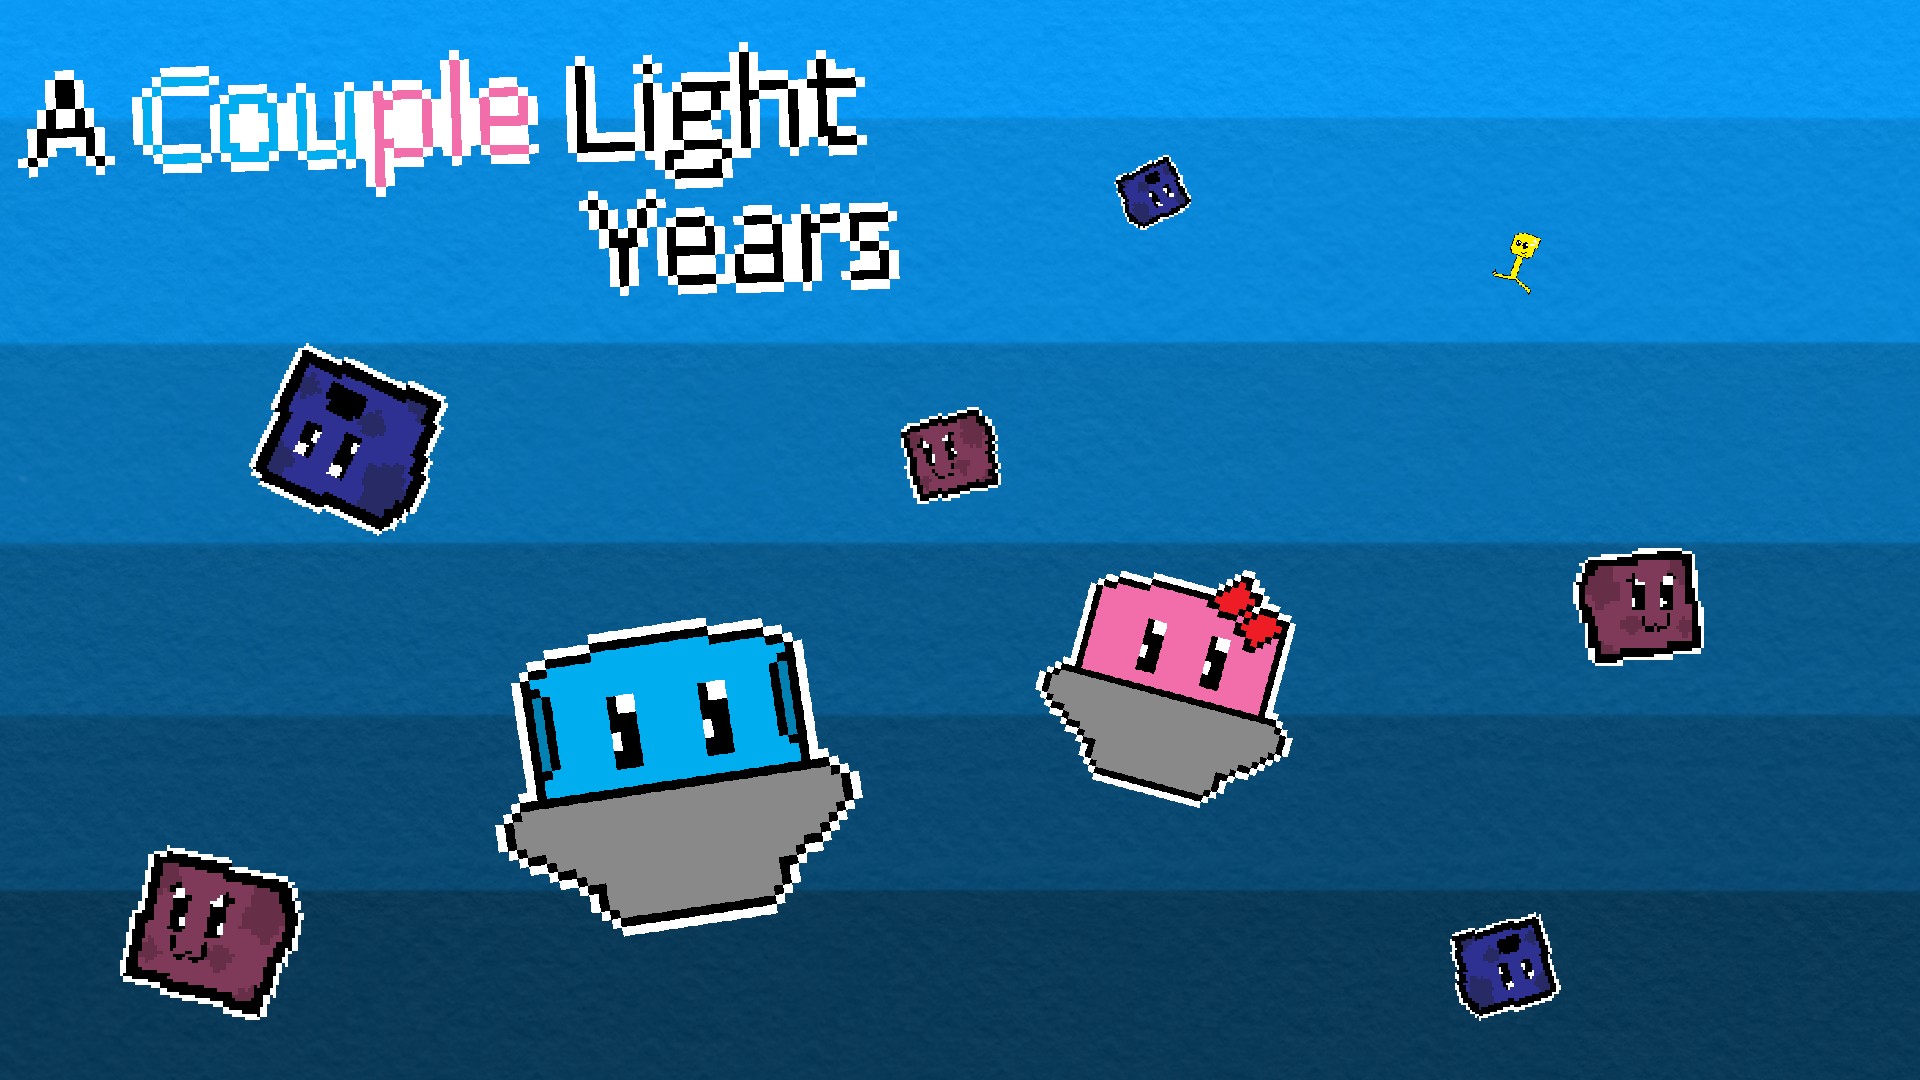 A Couple Light Years (Jam Update Itch Version)